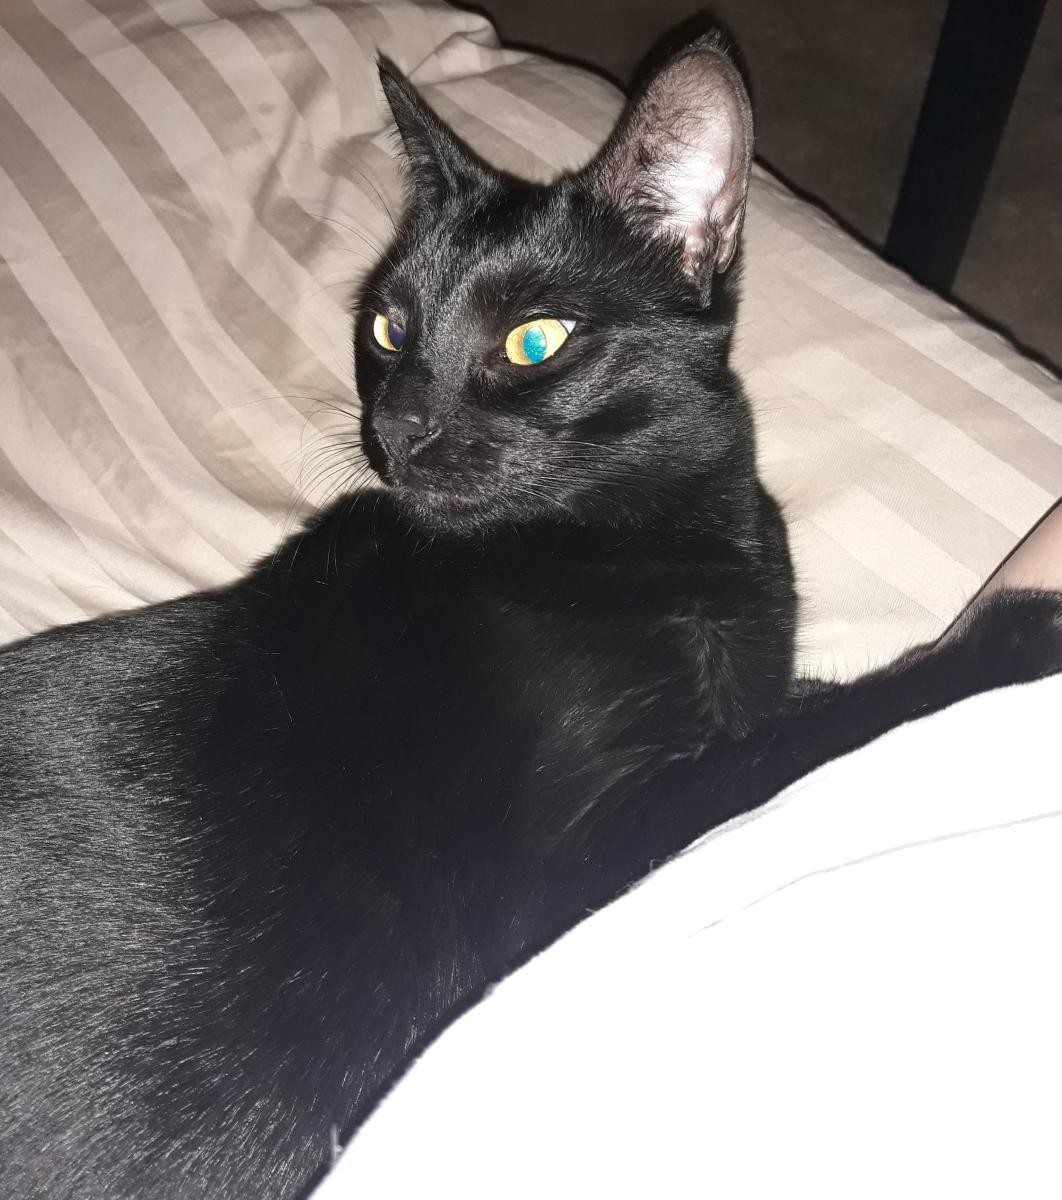 Image of Jazzy, Lost Cat